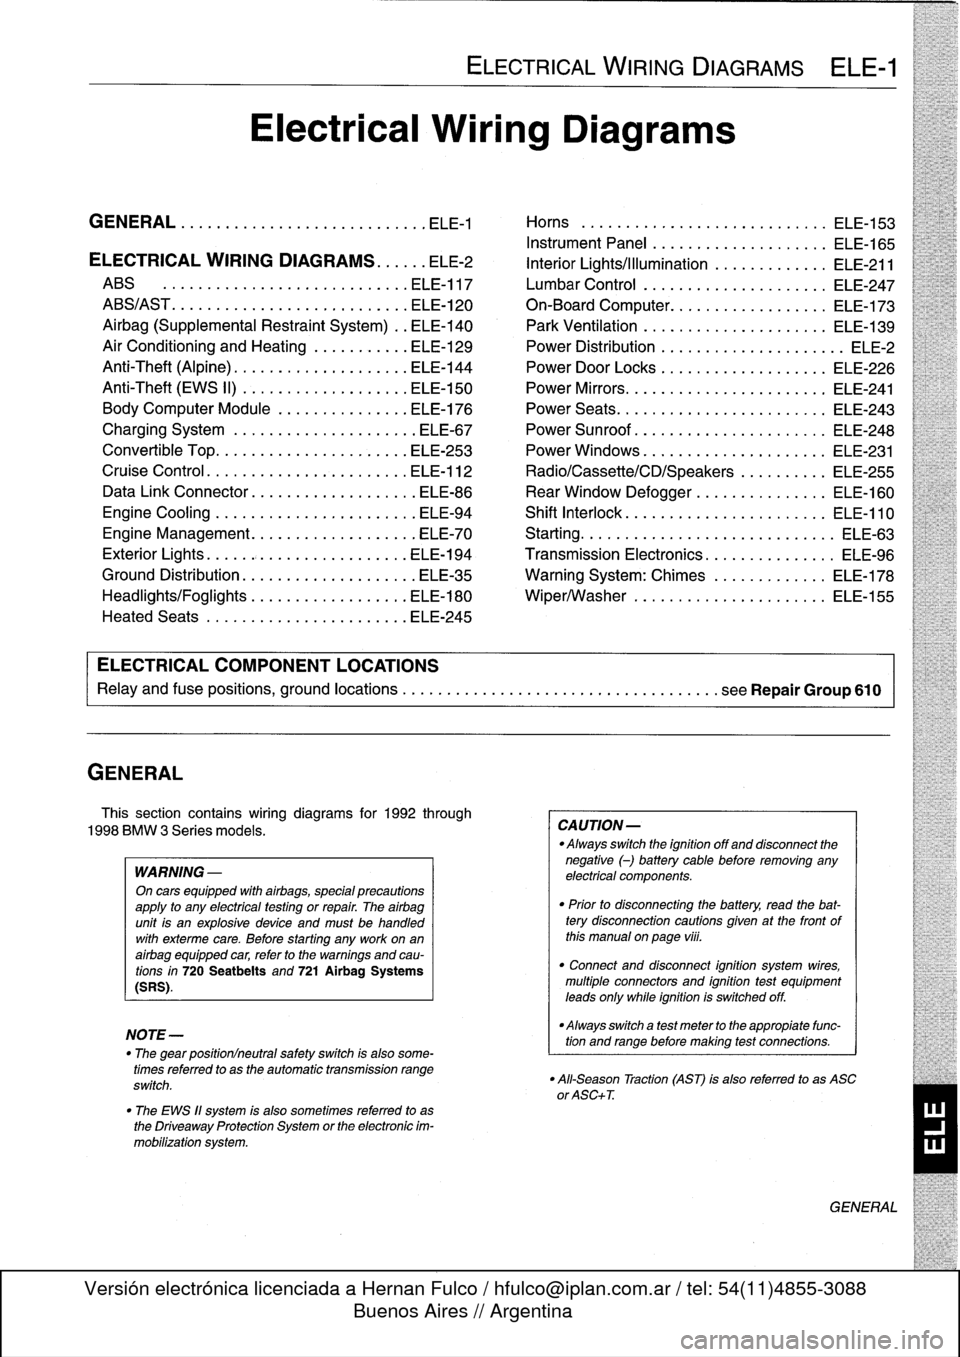 BMW 318i 1996 E36 Workshop Manual 
GENERAL

This
section
contains
wiring
diagrams
for
1992
through

1998
BMW
3
Series
models
.

WARNING
-

On
cars
equipped
with
airbags,
special
precautions
apply
to
any
electrical
testing
or
repair
.
